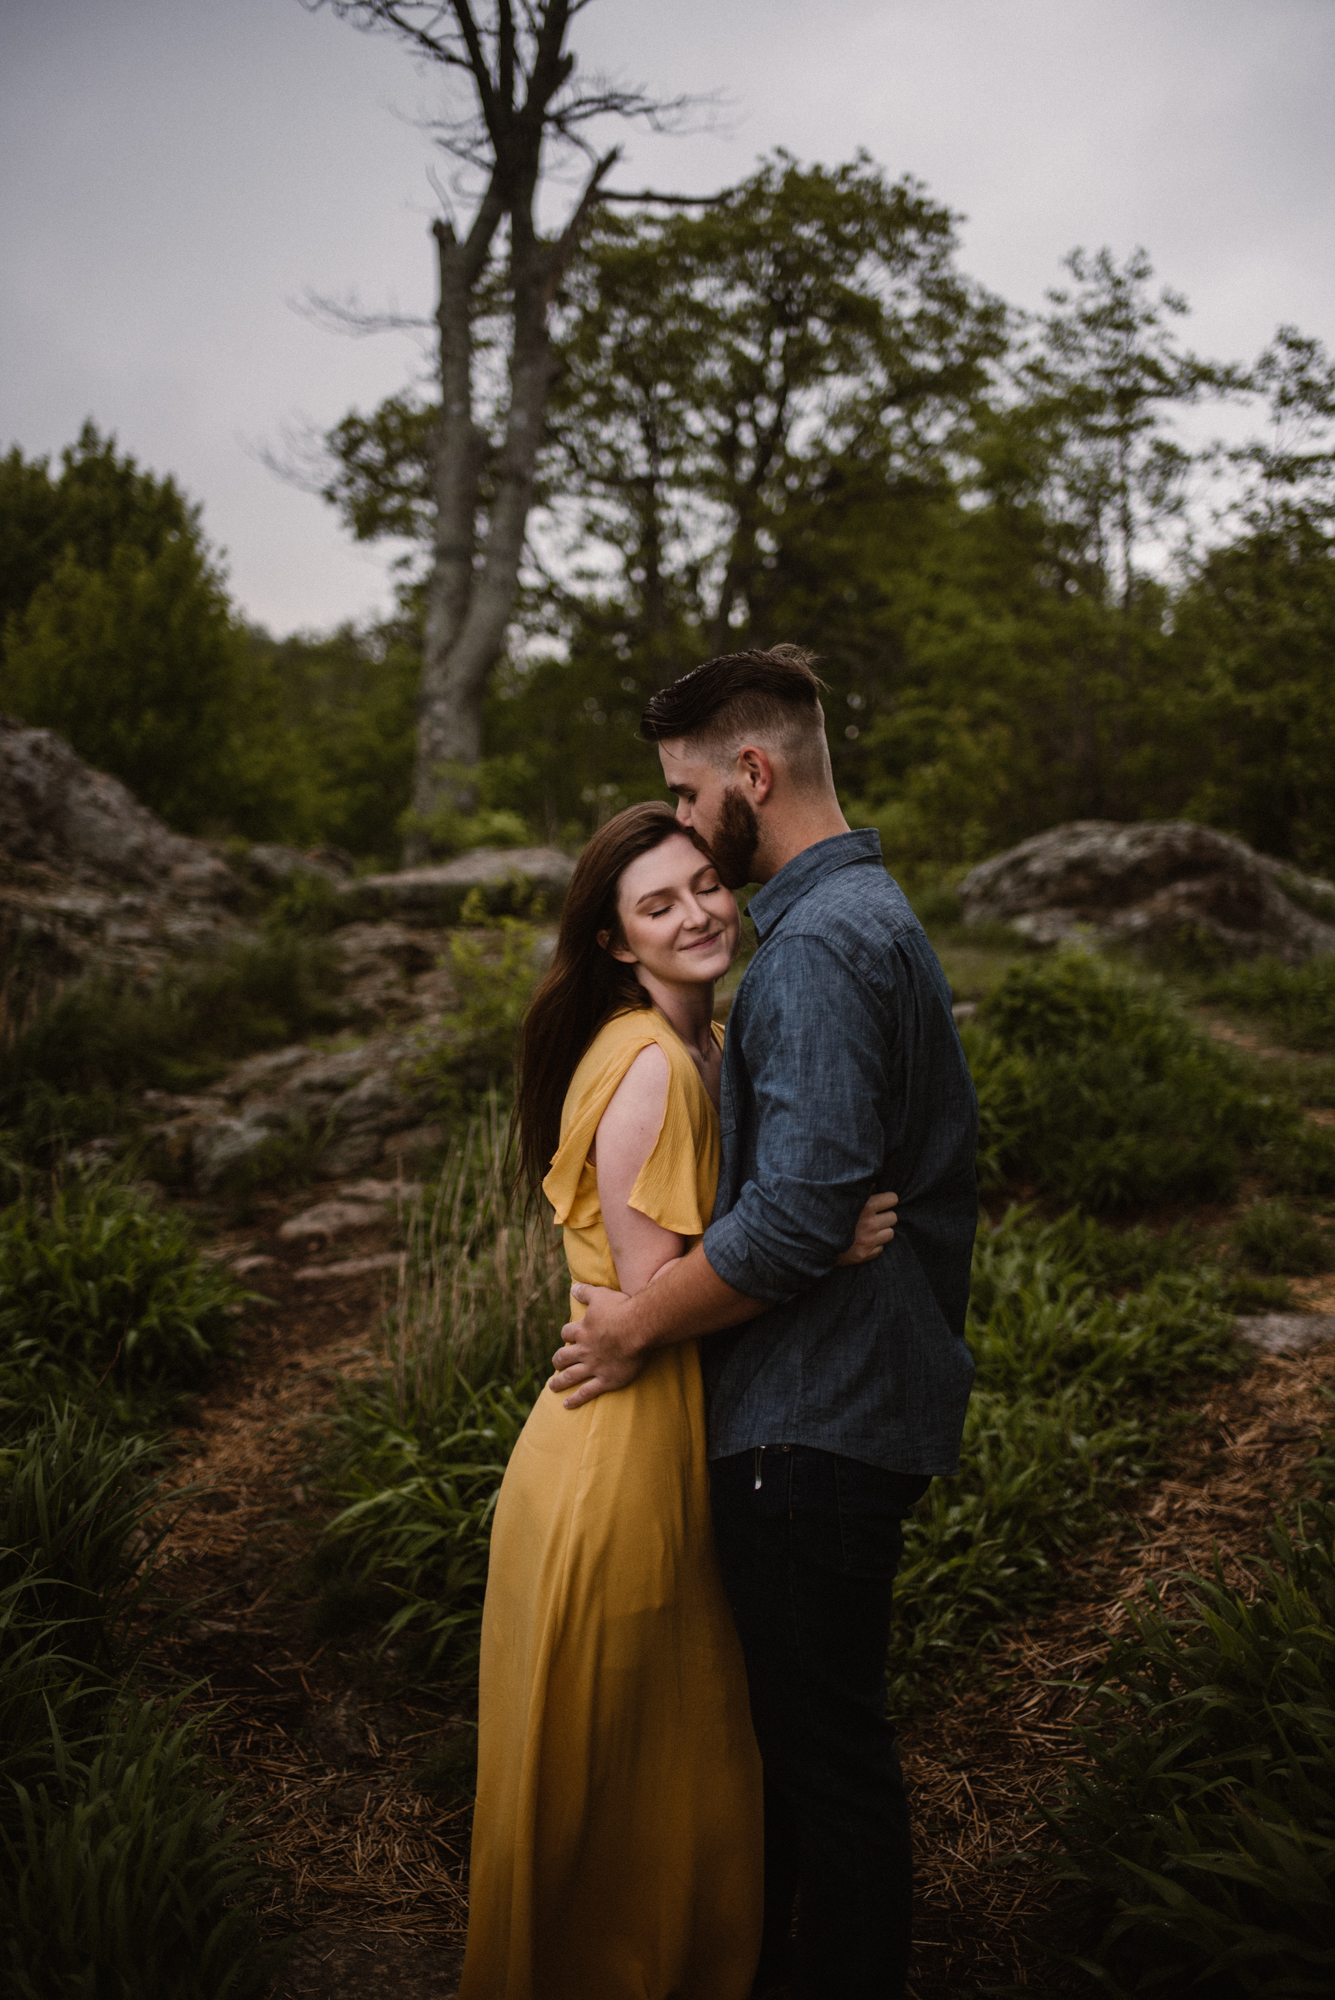 Camryn and Larry Sunrise Engagement Session in Shenandoah National Park - Things to Do in Luray Virginia - Adventurous Couple Photo Shoot White Sails Creative_16.jpg